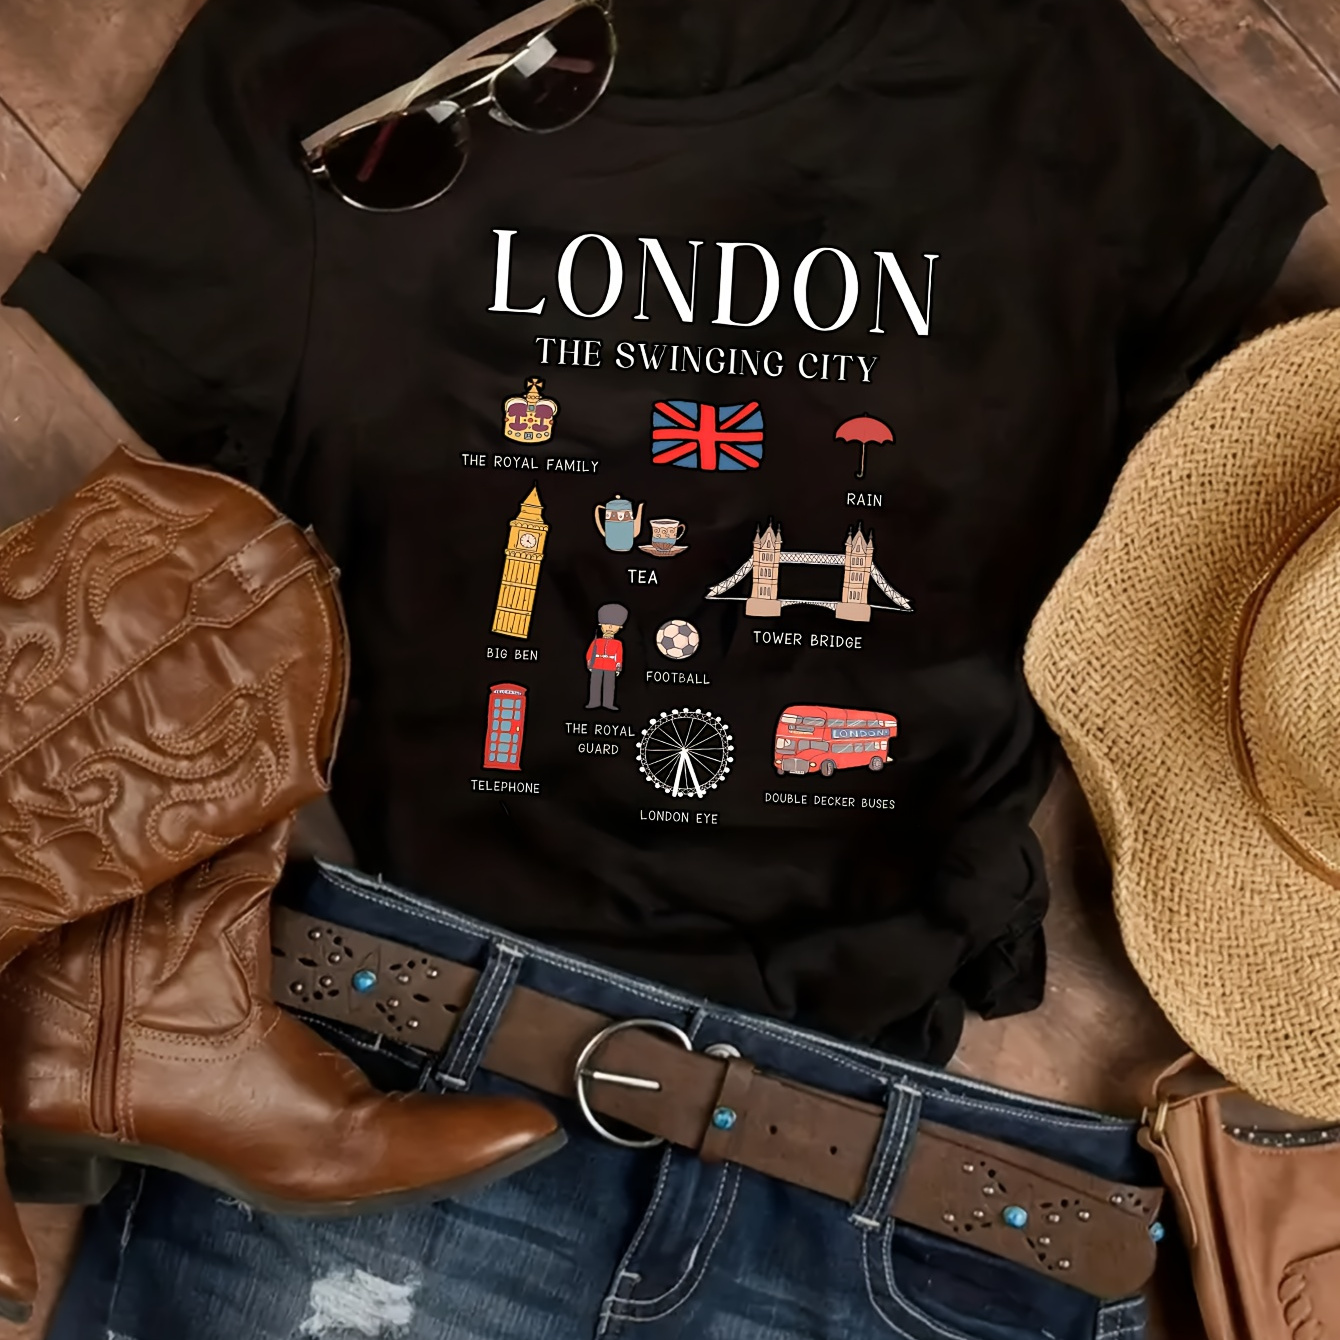 

Women's Casual Sport London Tee, Short Sleeve Sports T-shirt With Iconic Uk Symbols, Fashion Top, Round Neck Shirt For Travel & Daily Wear